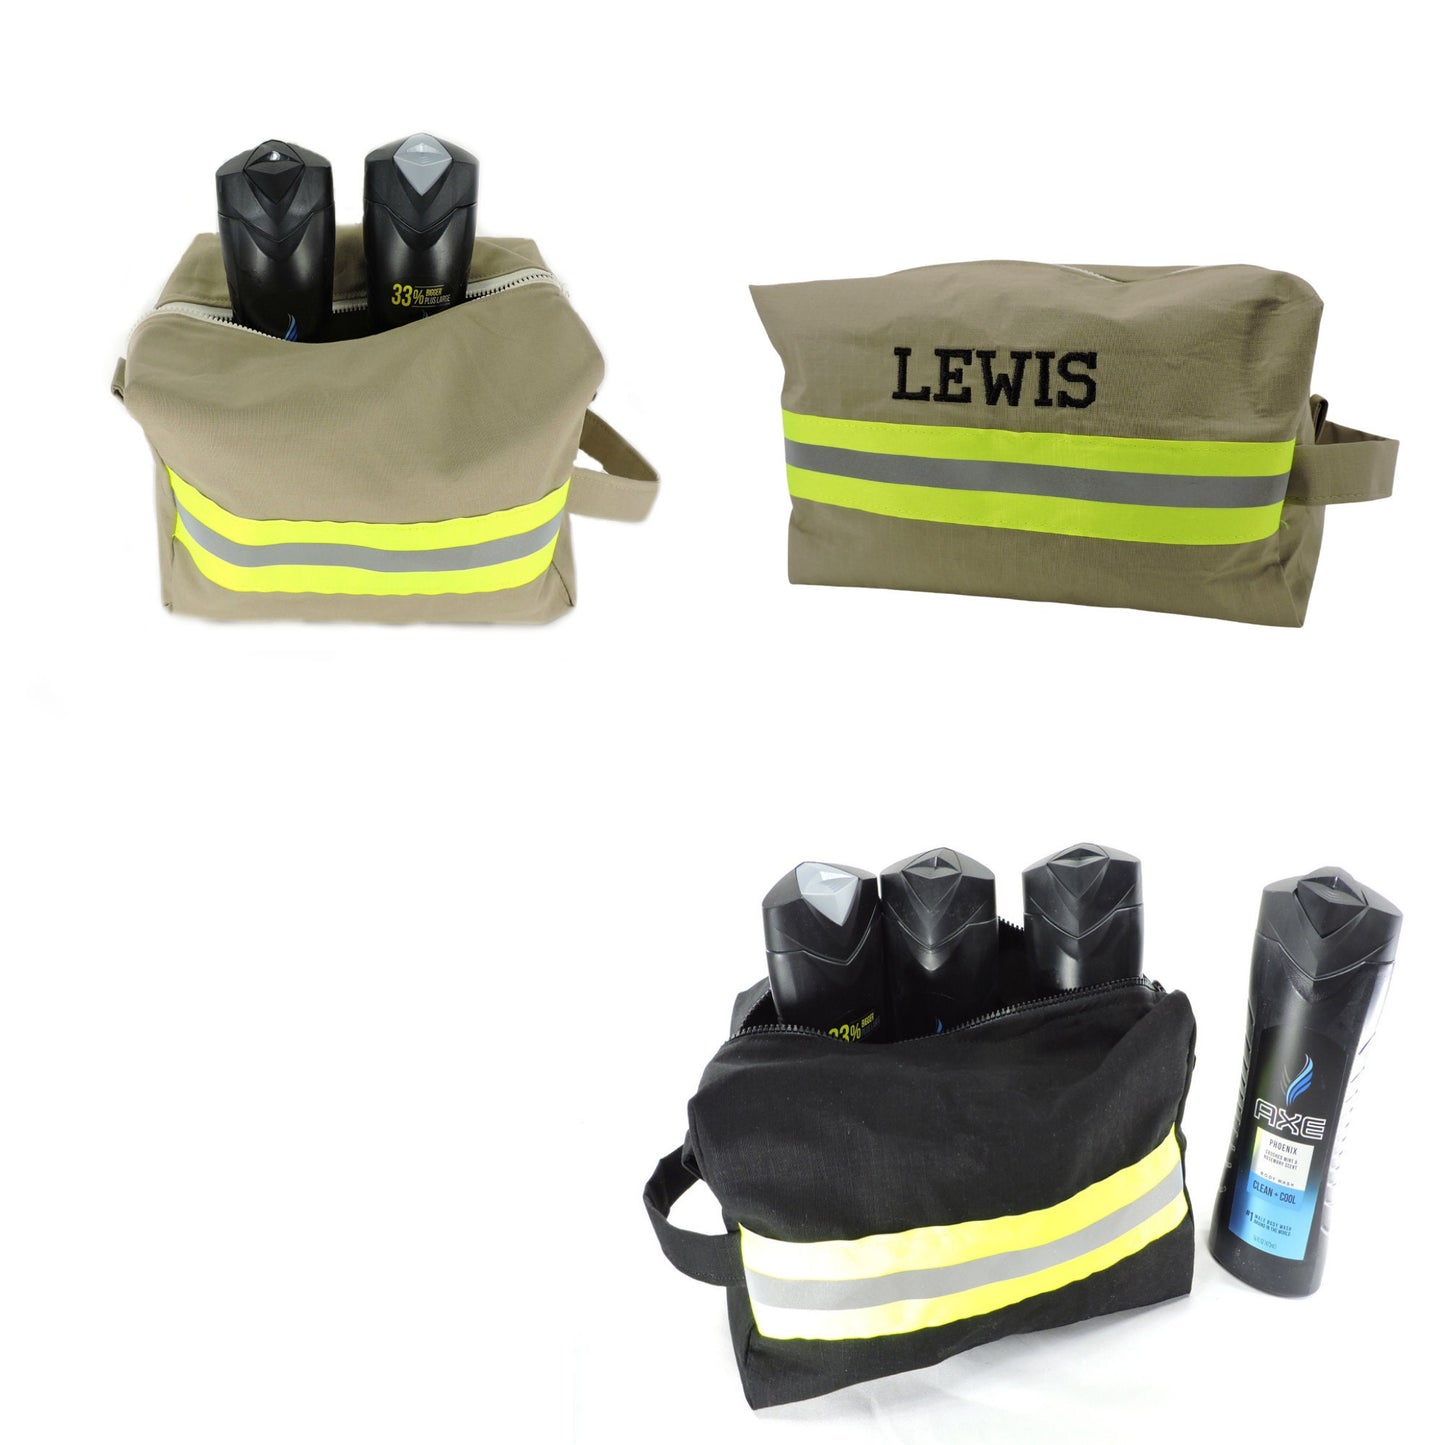 firefighter travel bag with items inside